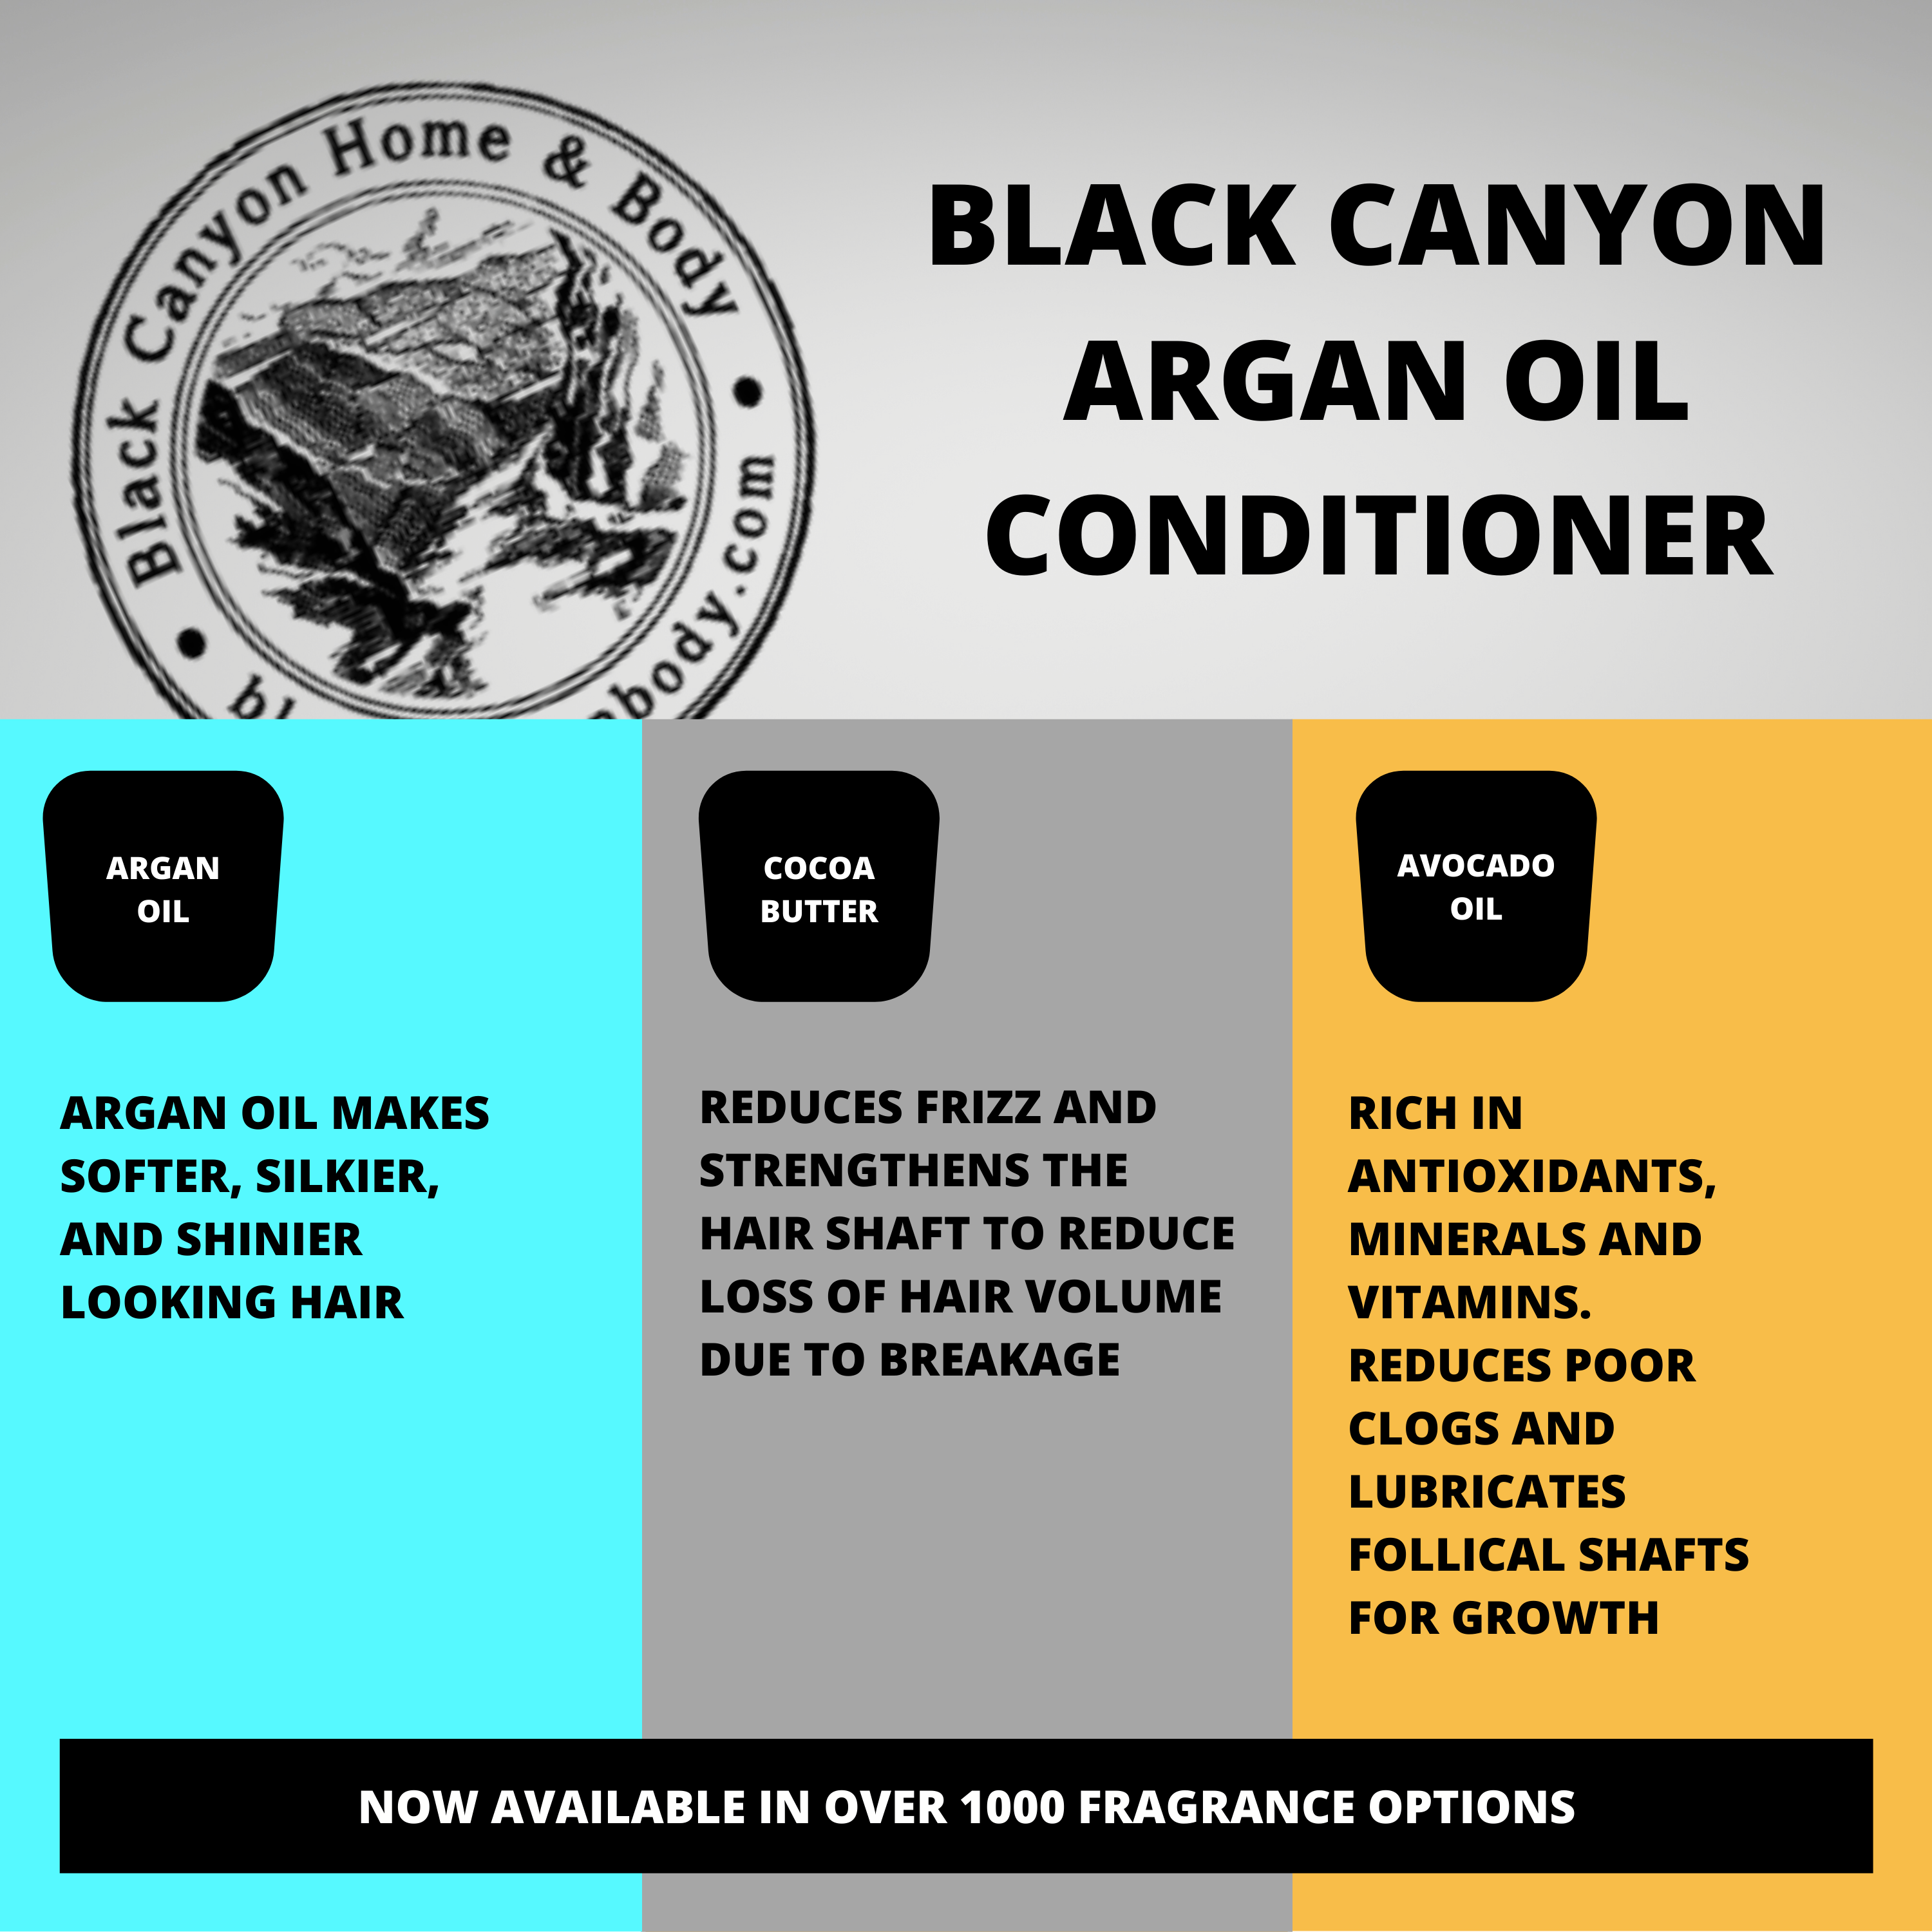 Black Canyon Sour Lemon & Vanilla Scented Conditioner with Argan Oil